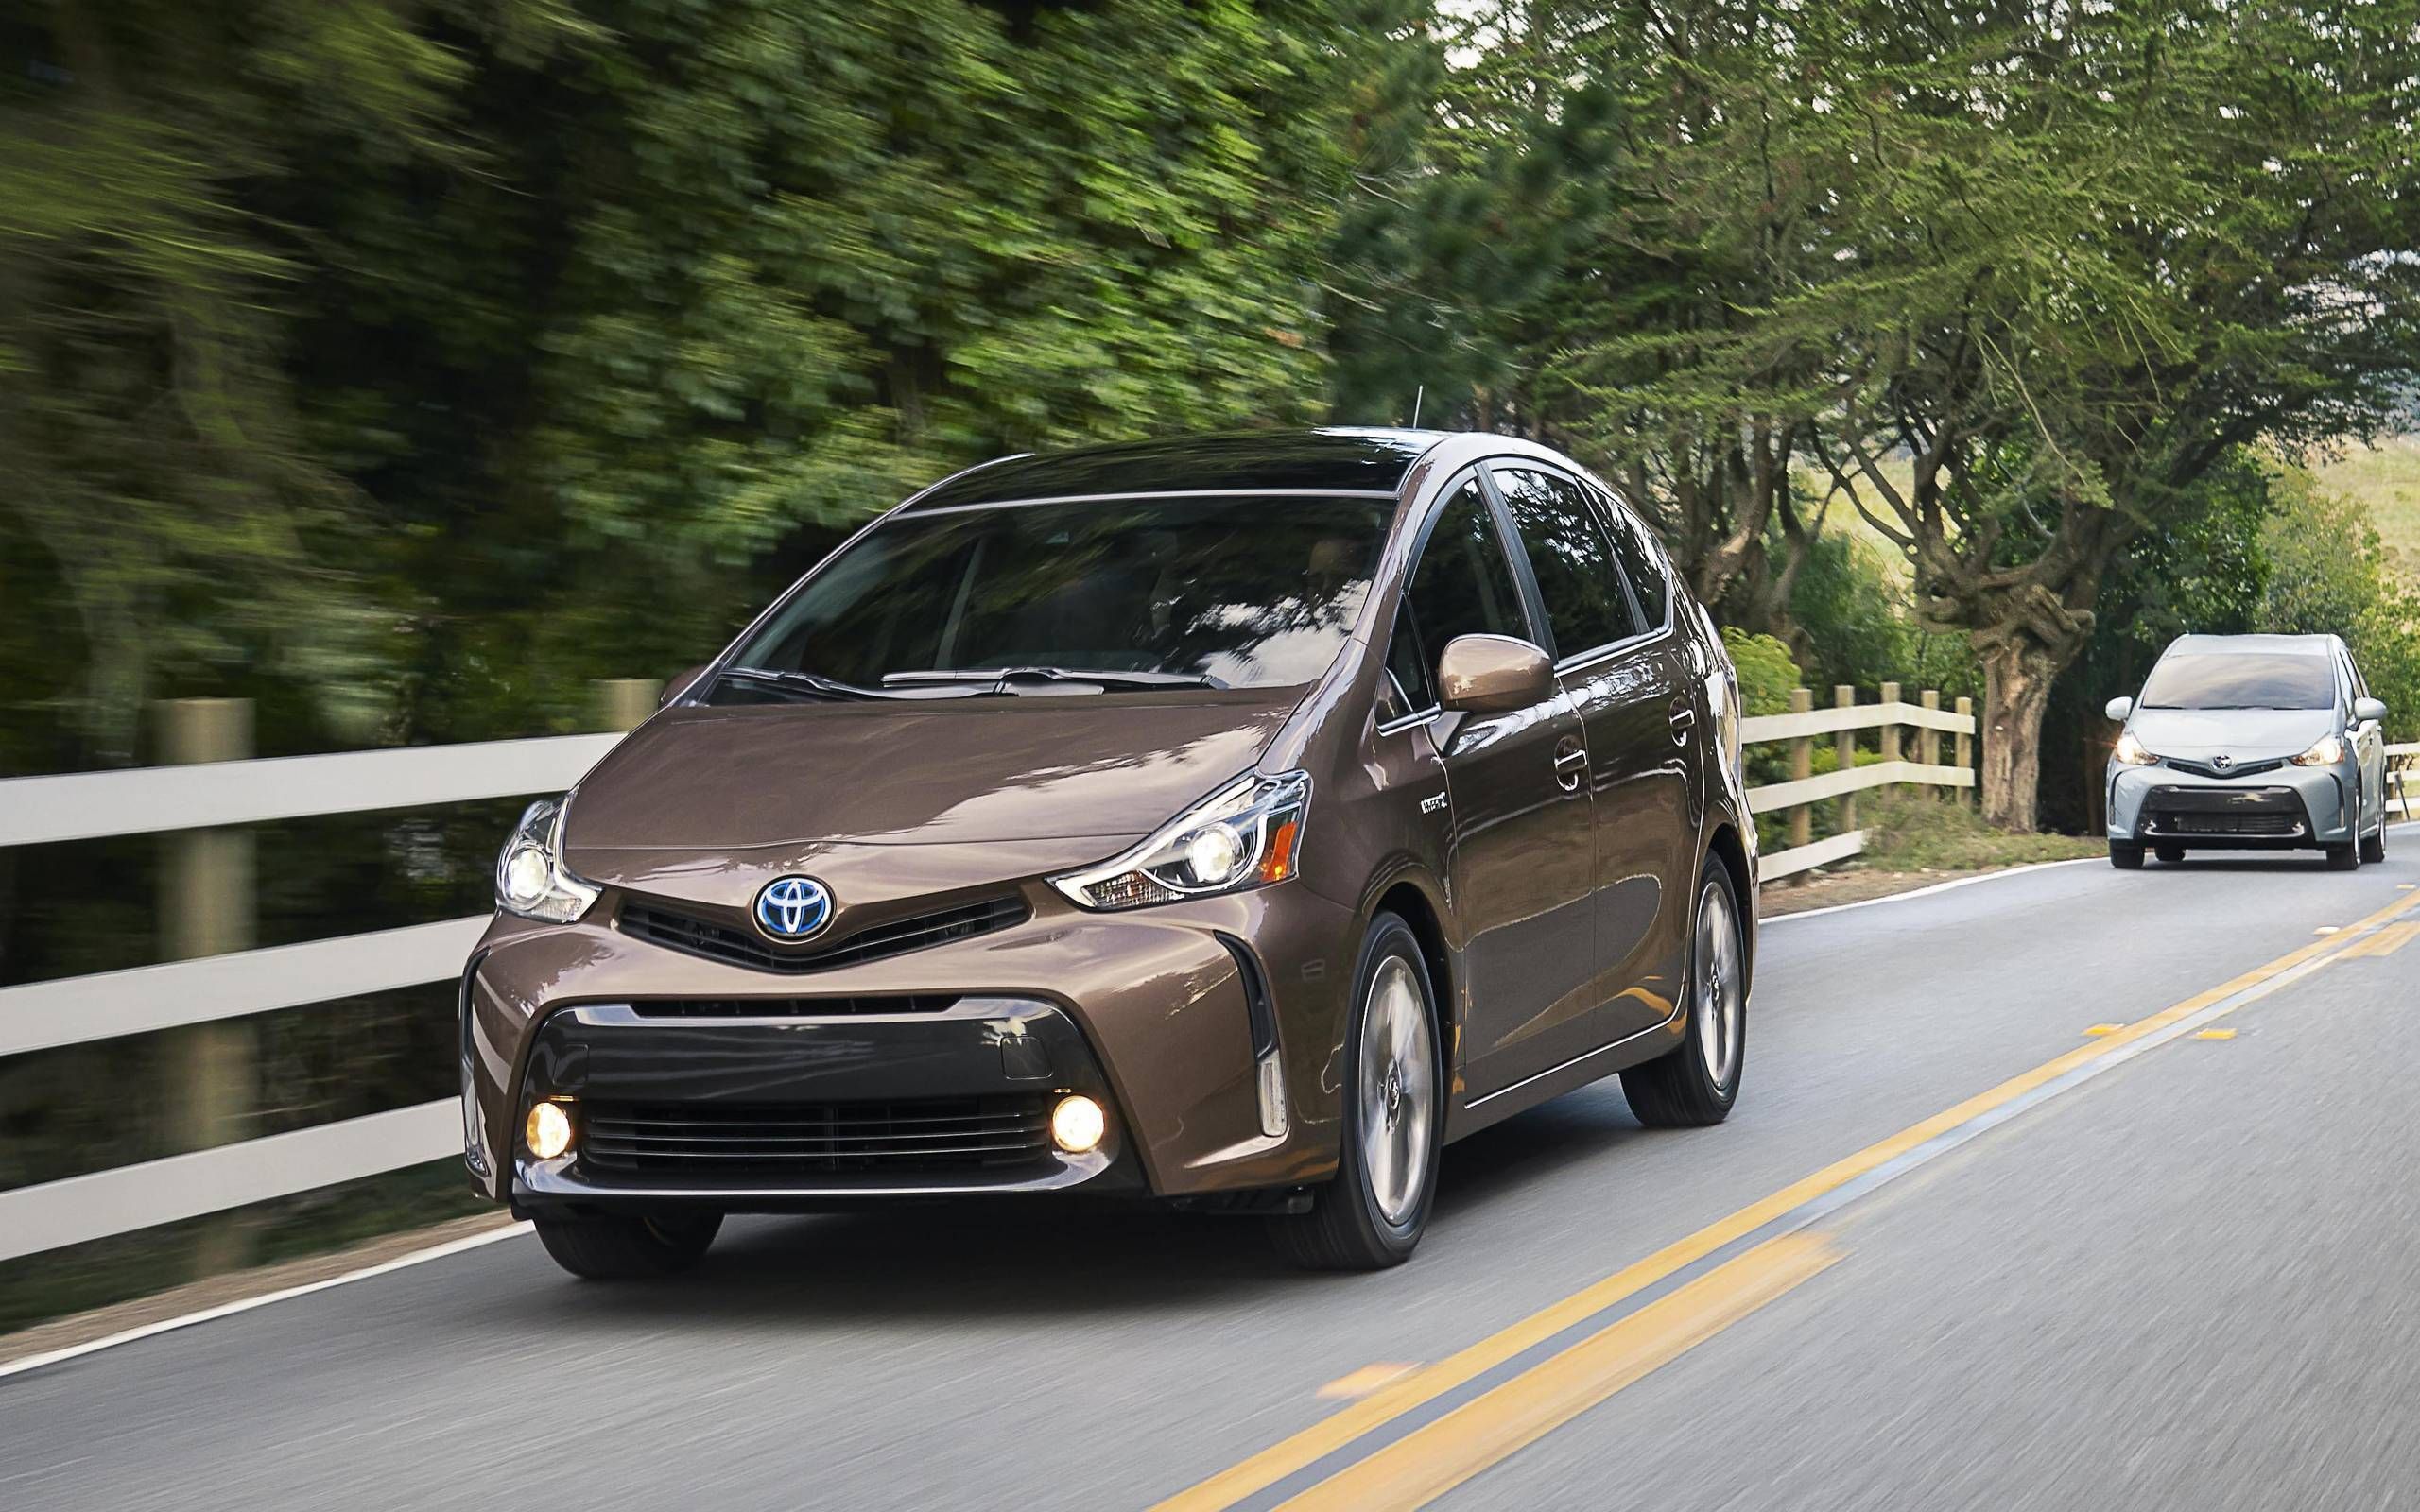 Refreshed Toyota Prius V shows up at LA Auto Show